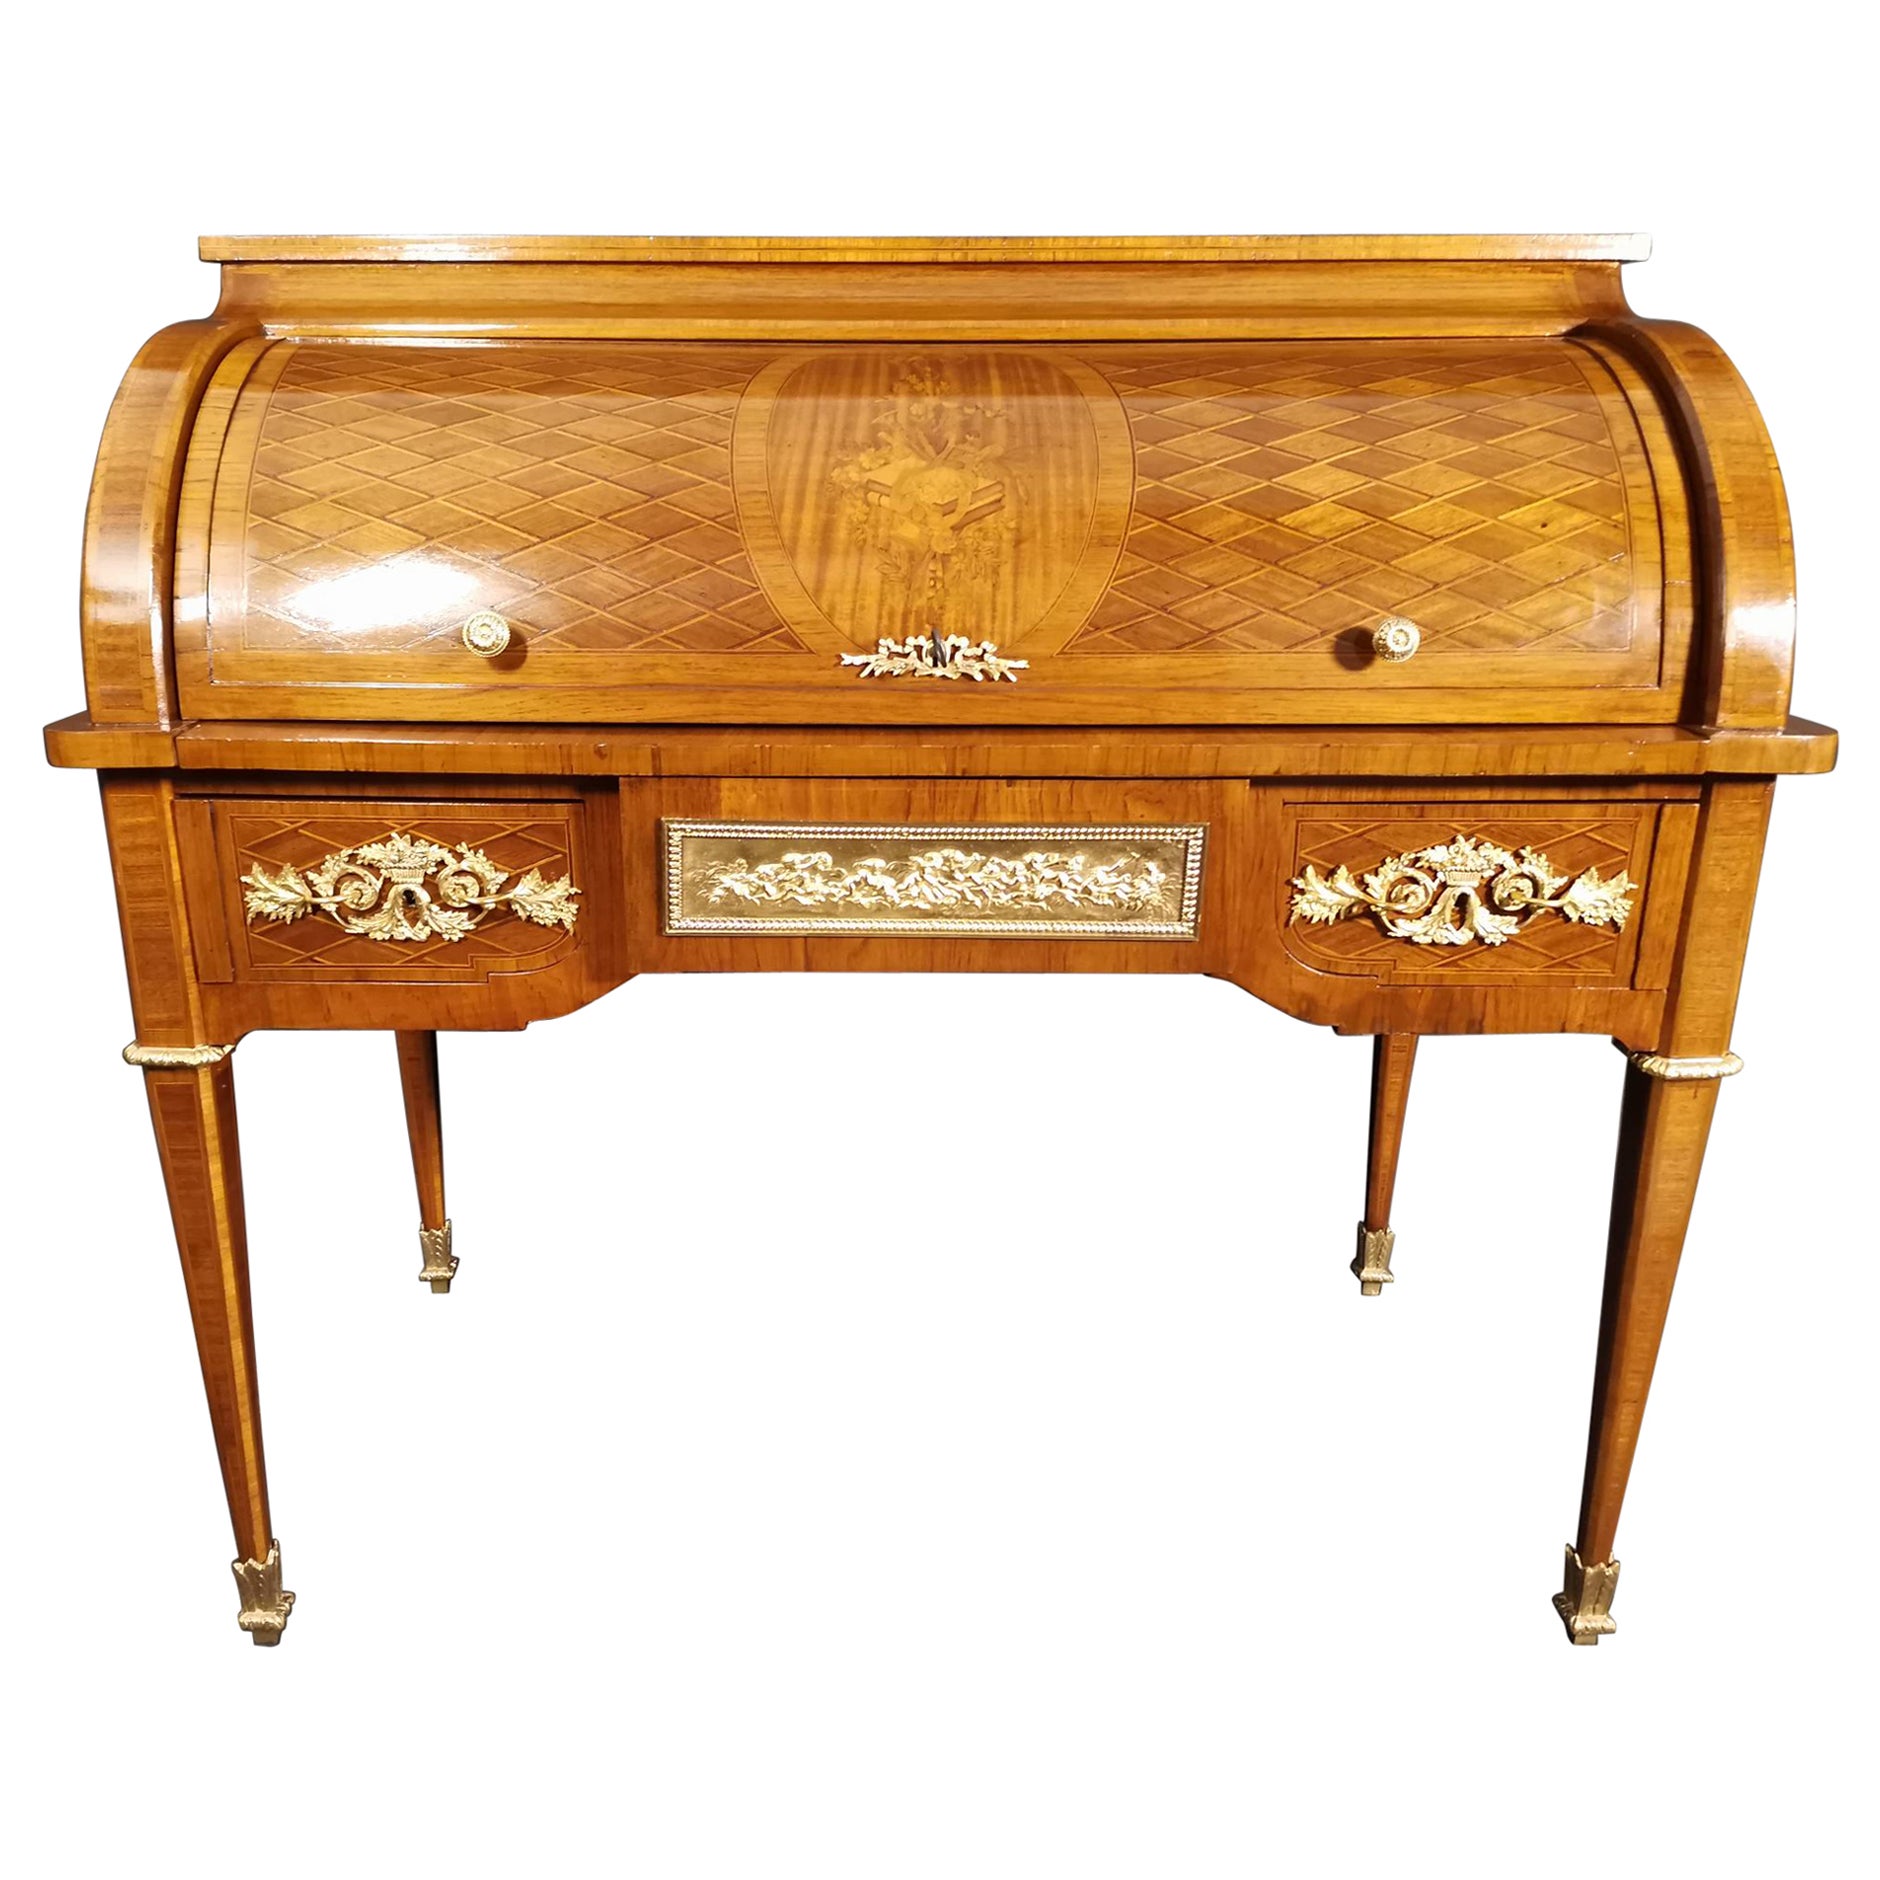 19th Century French Cylinder Desk in Louis XVI Style Marquetry